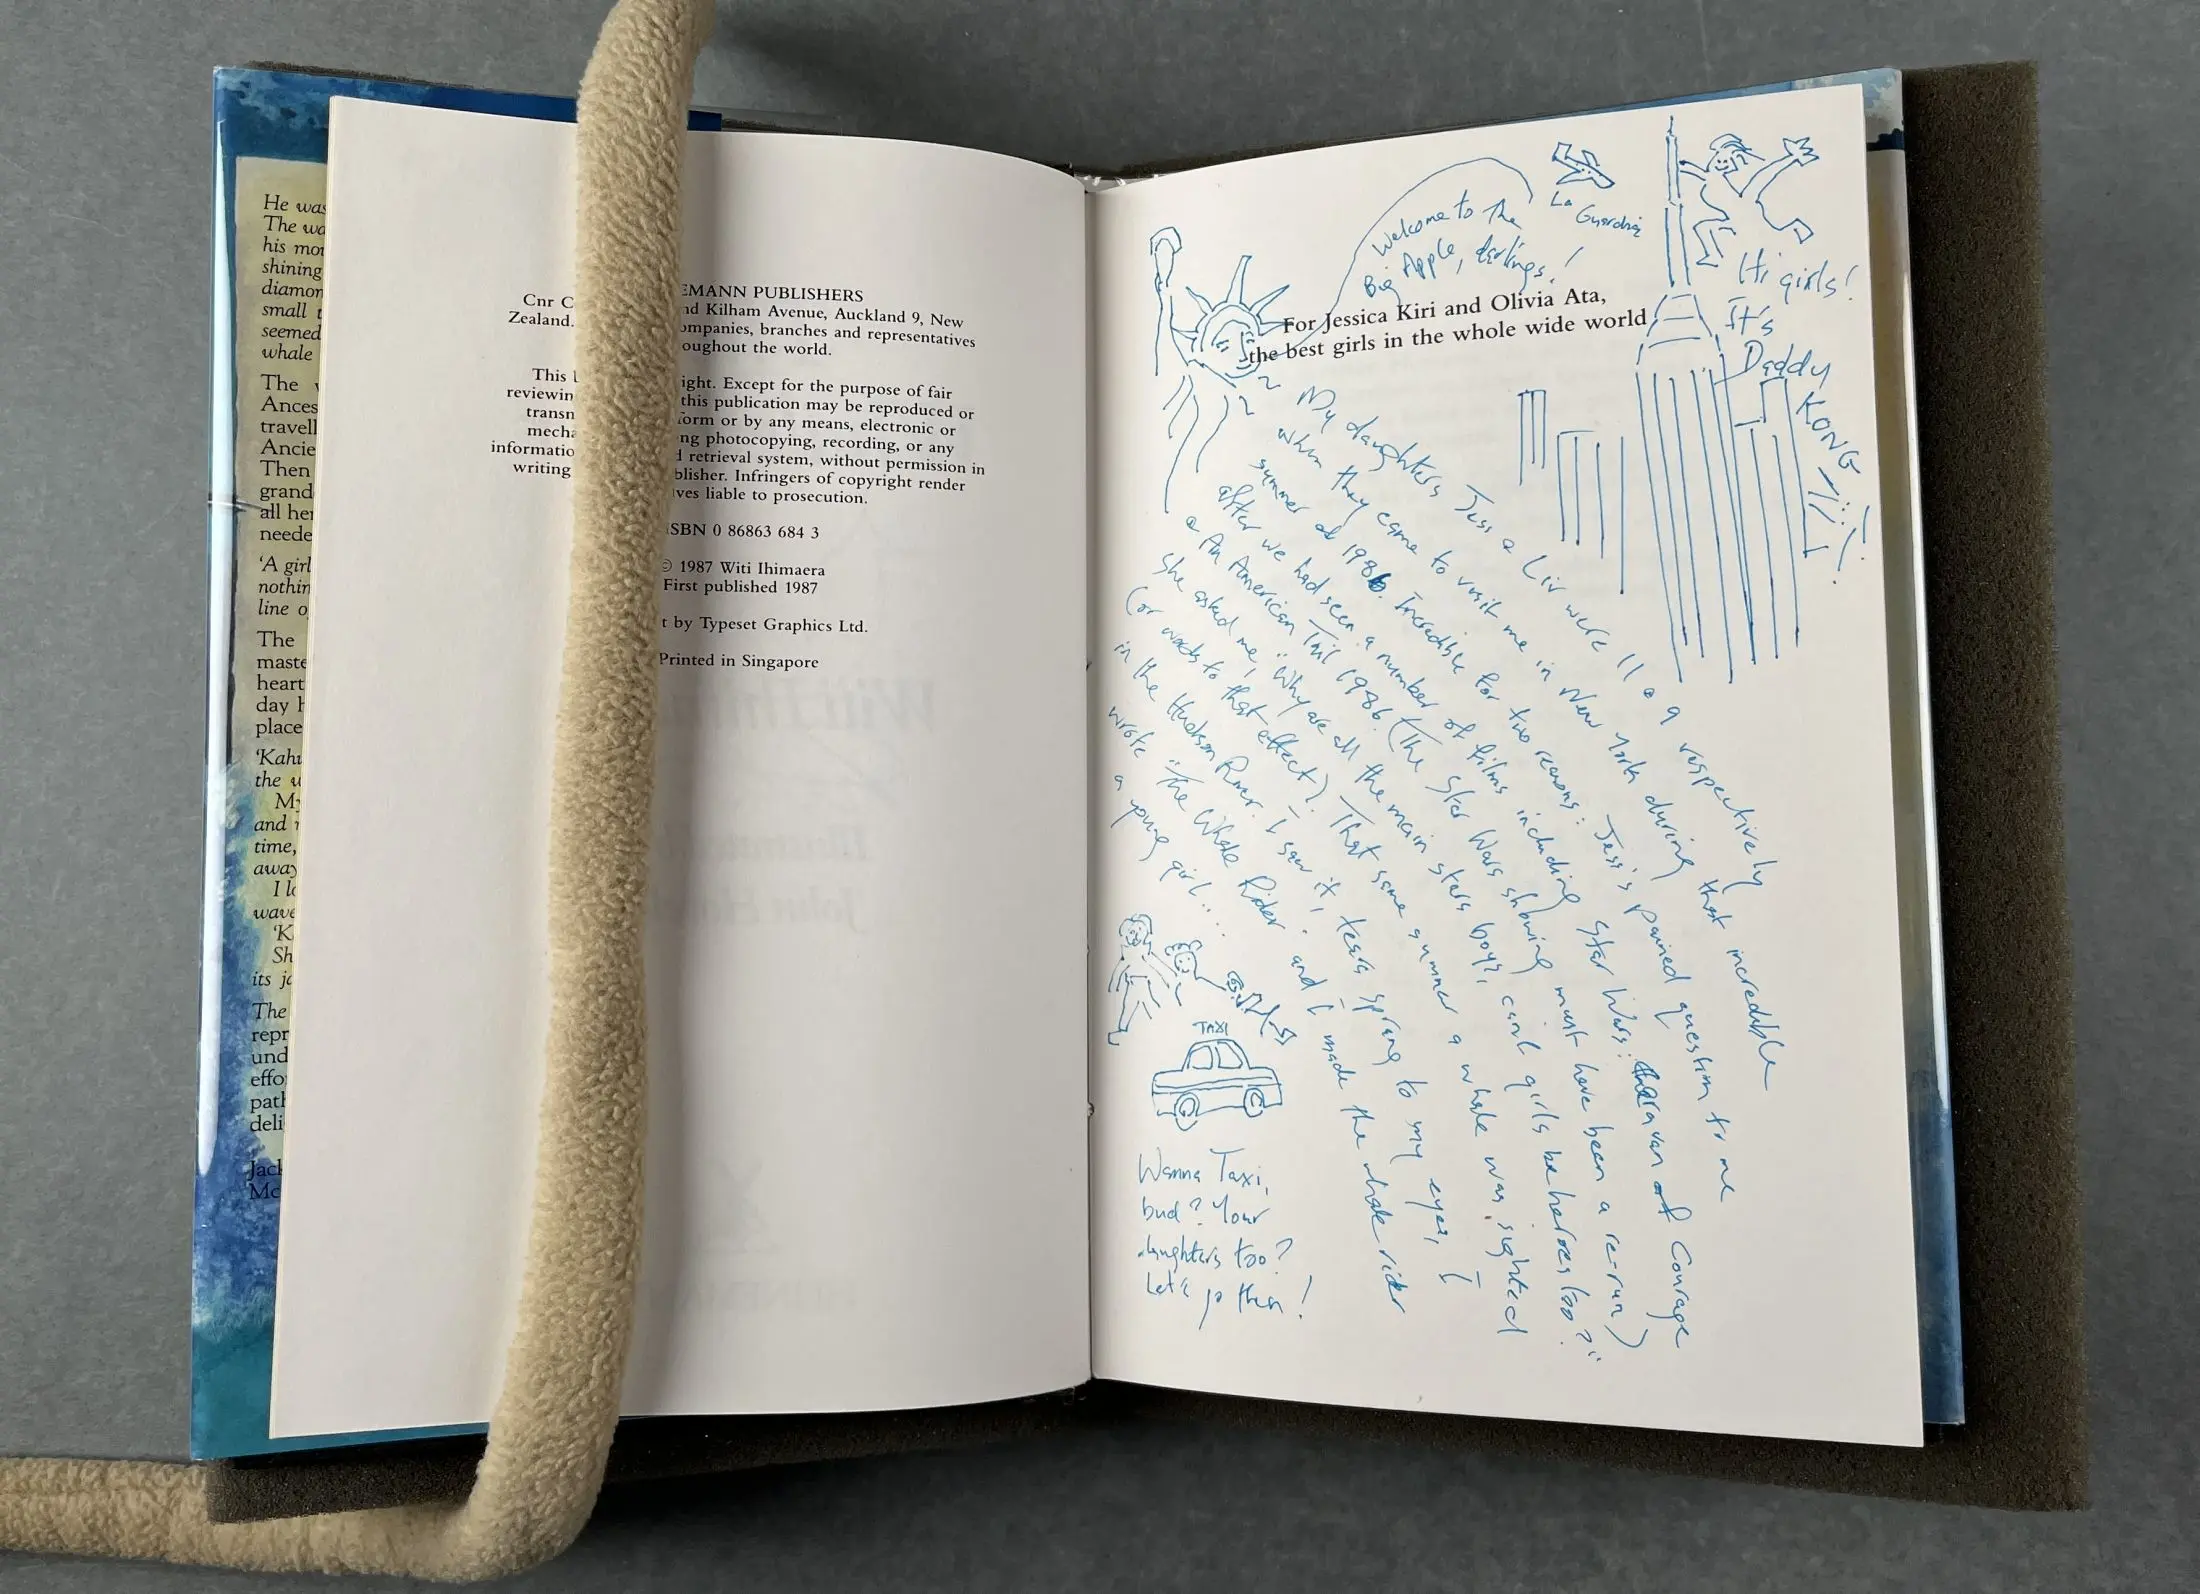 A book held open to show handwritten drawings and words on the dedication page. 